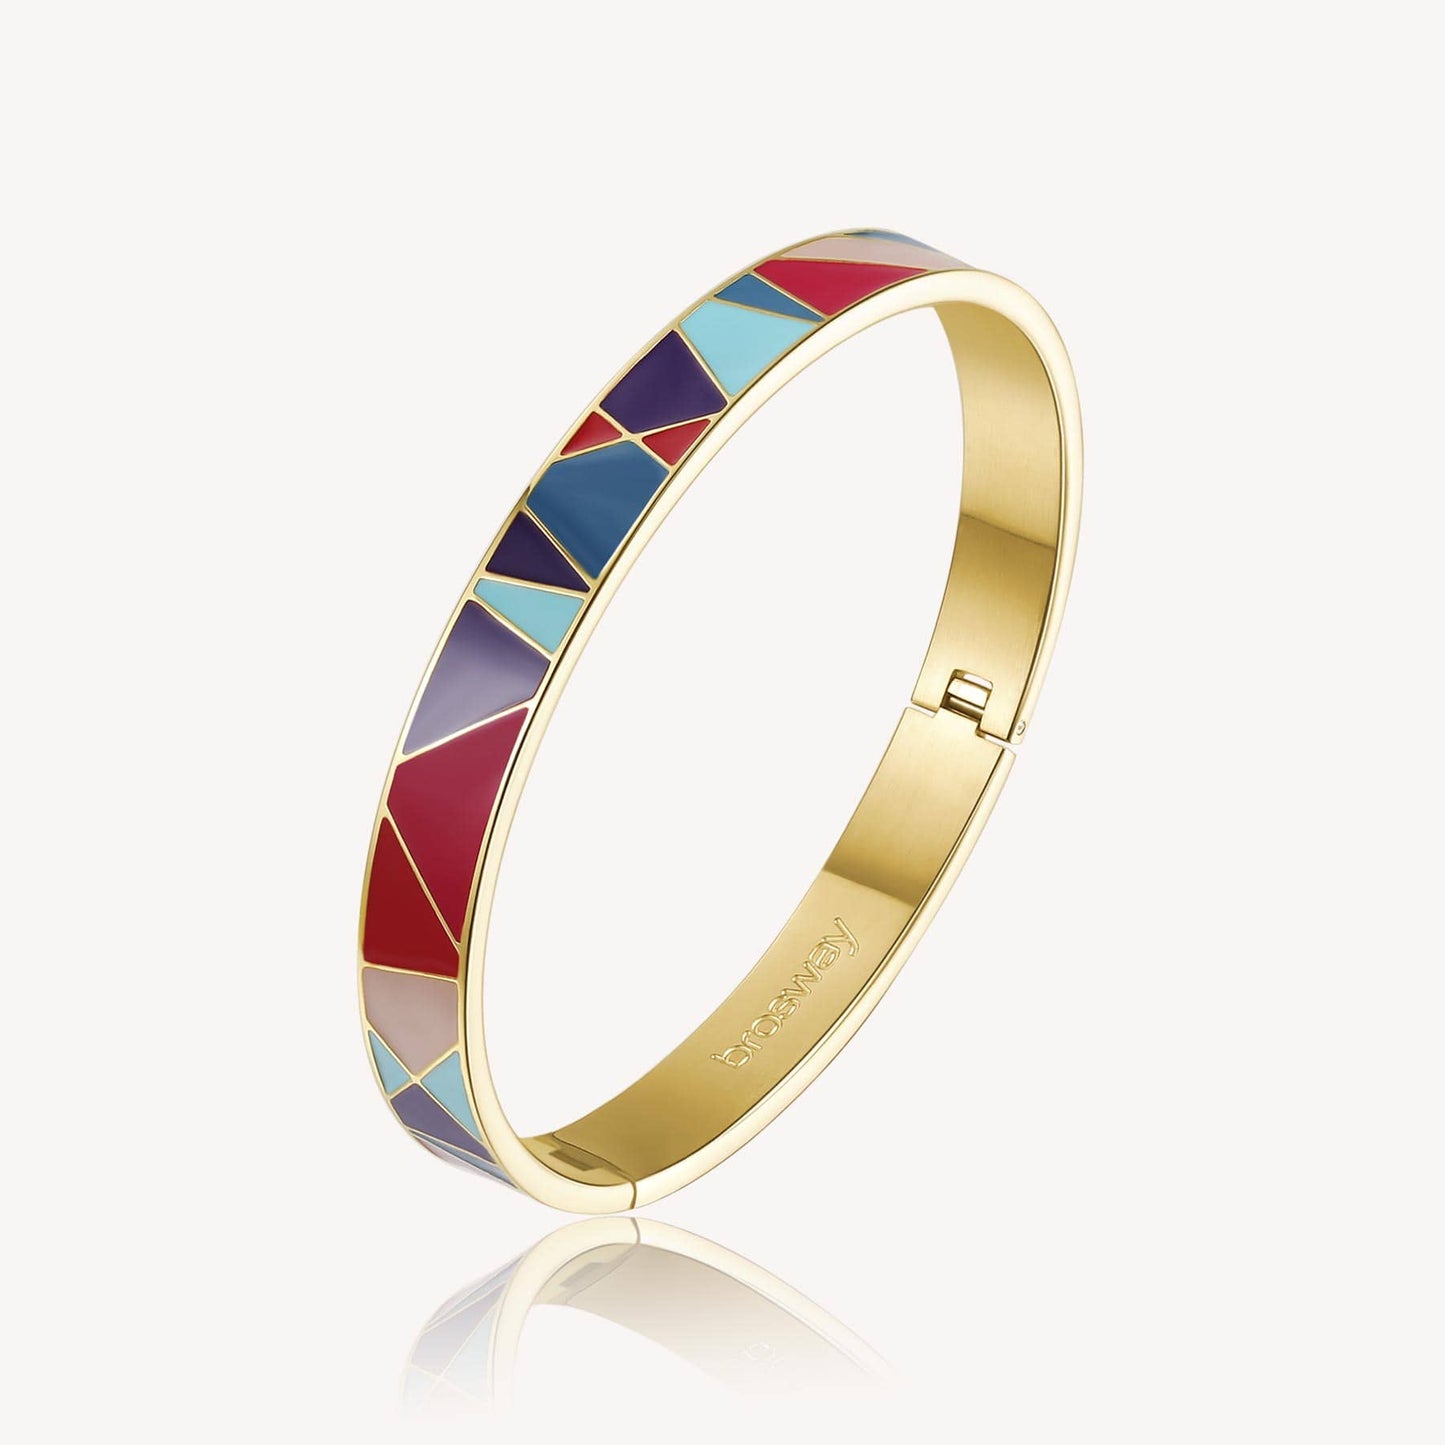 BRC-SS Stainless Steel Gold Tone Latching Bangle with Multicolored Enamel